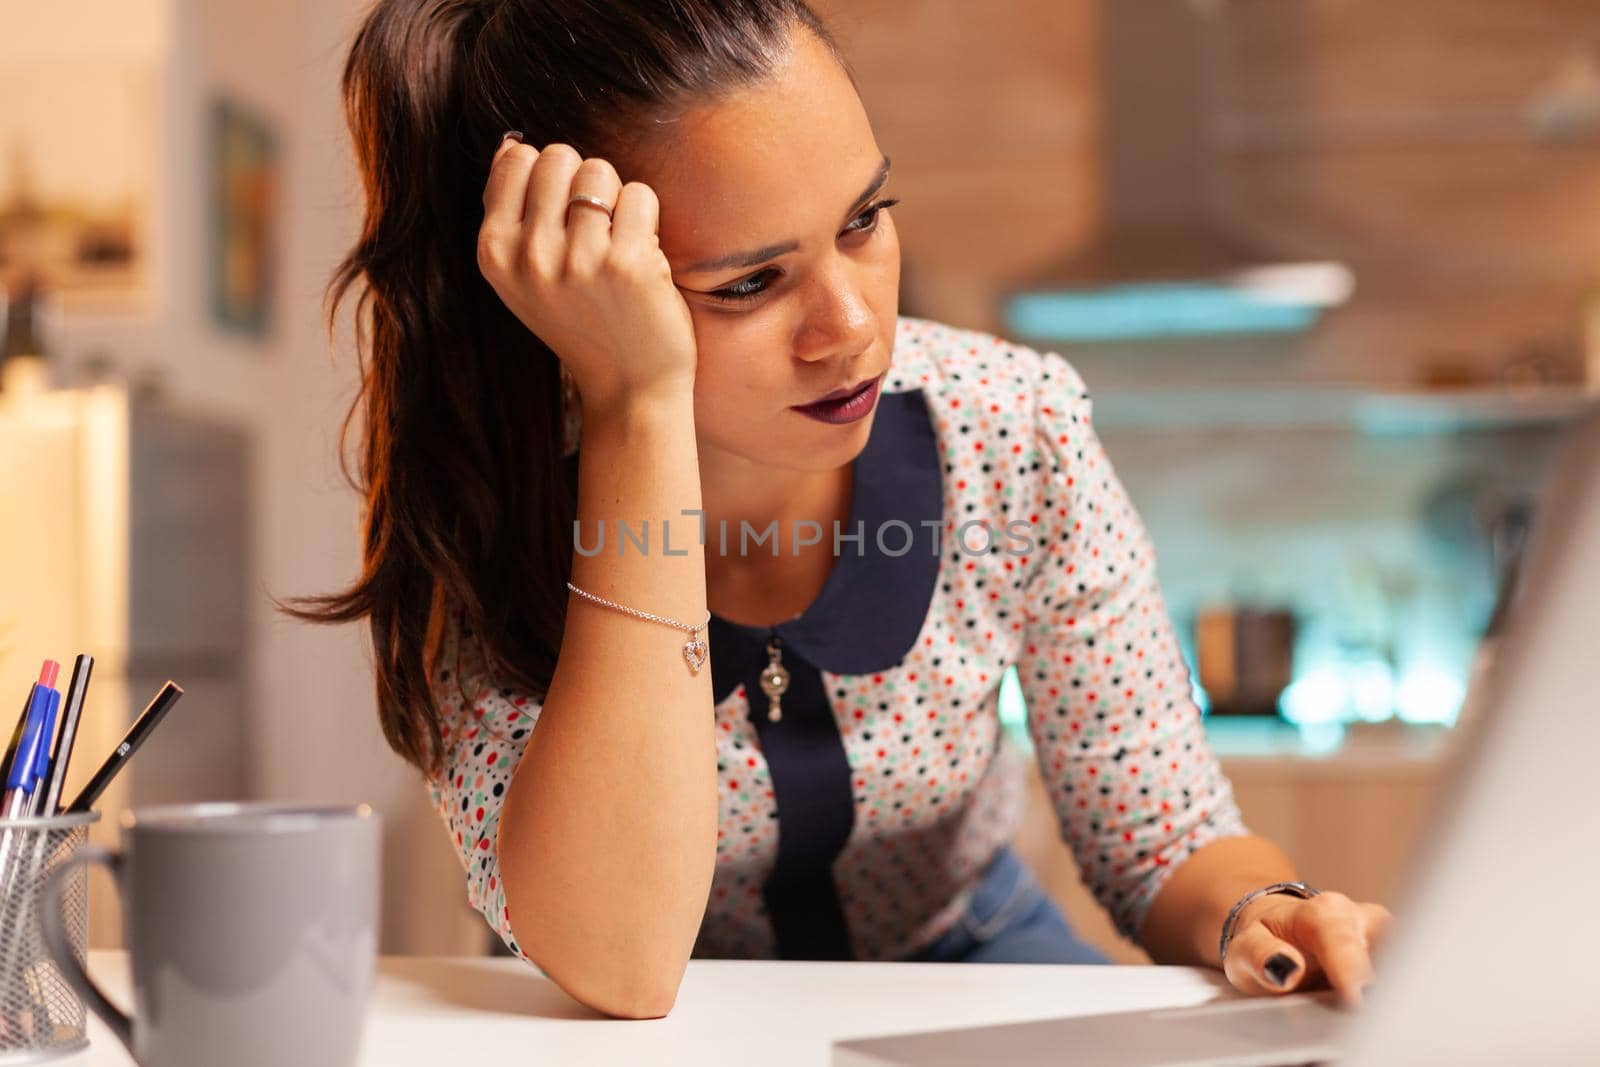 Female entrepreneur reading emails on laptop sitting on desk in home kitchen, Employee using modern technology at midnight doing overtime for job, business, busy, career, network, lifestyle ,wireless.